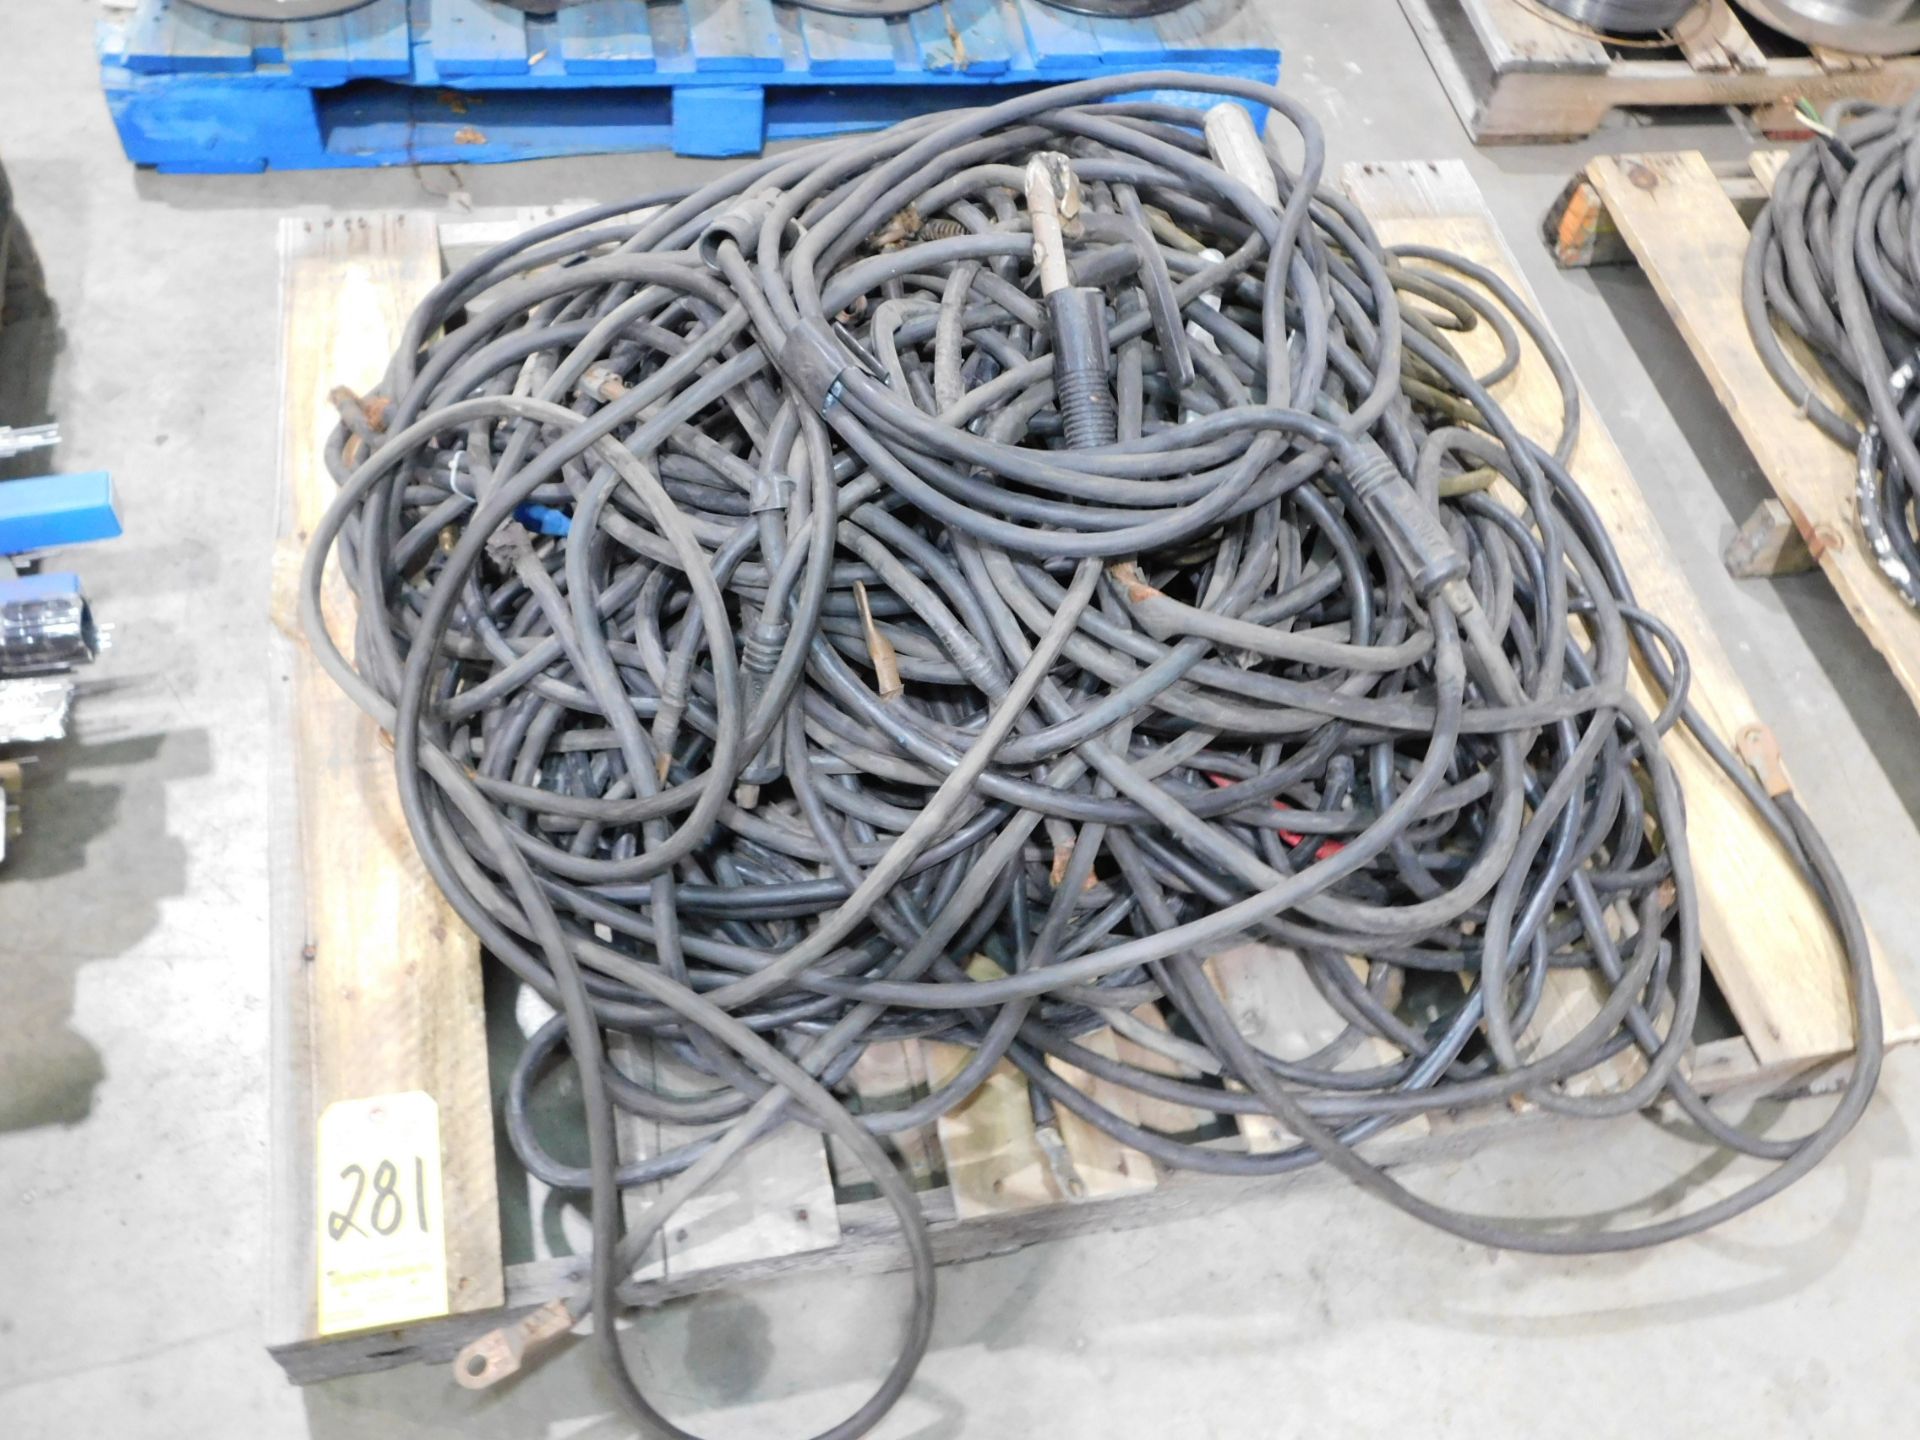 Skid Lot of Welding Leads and Ground